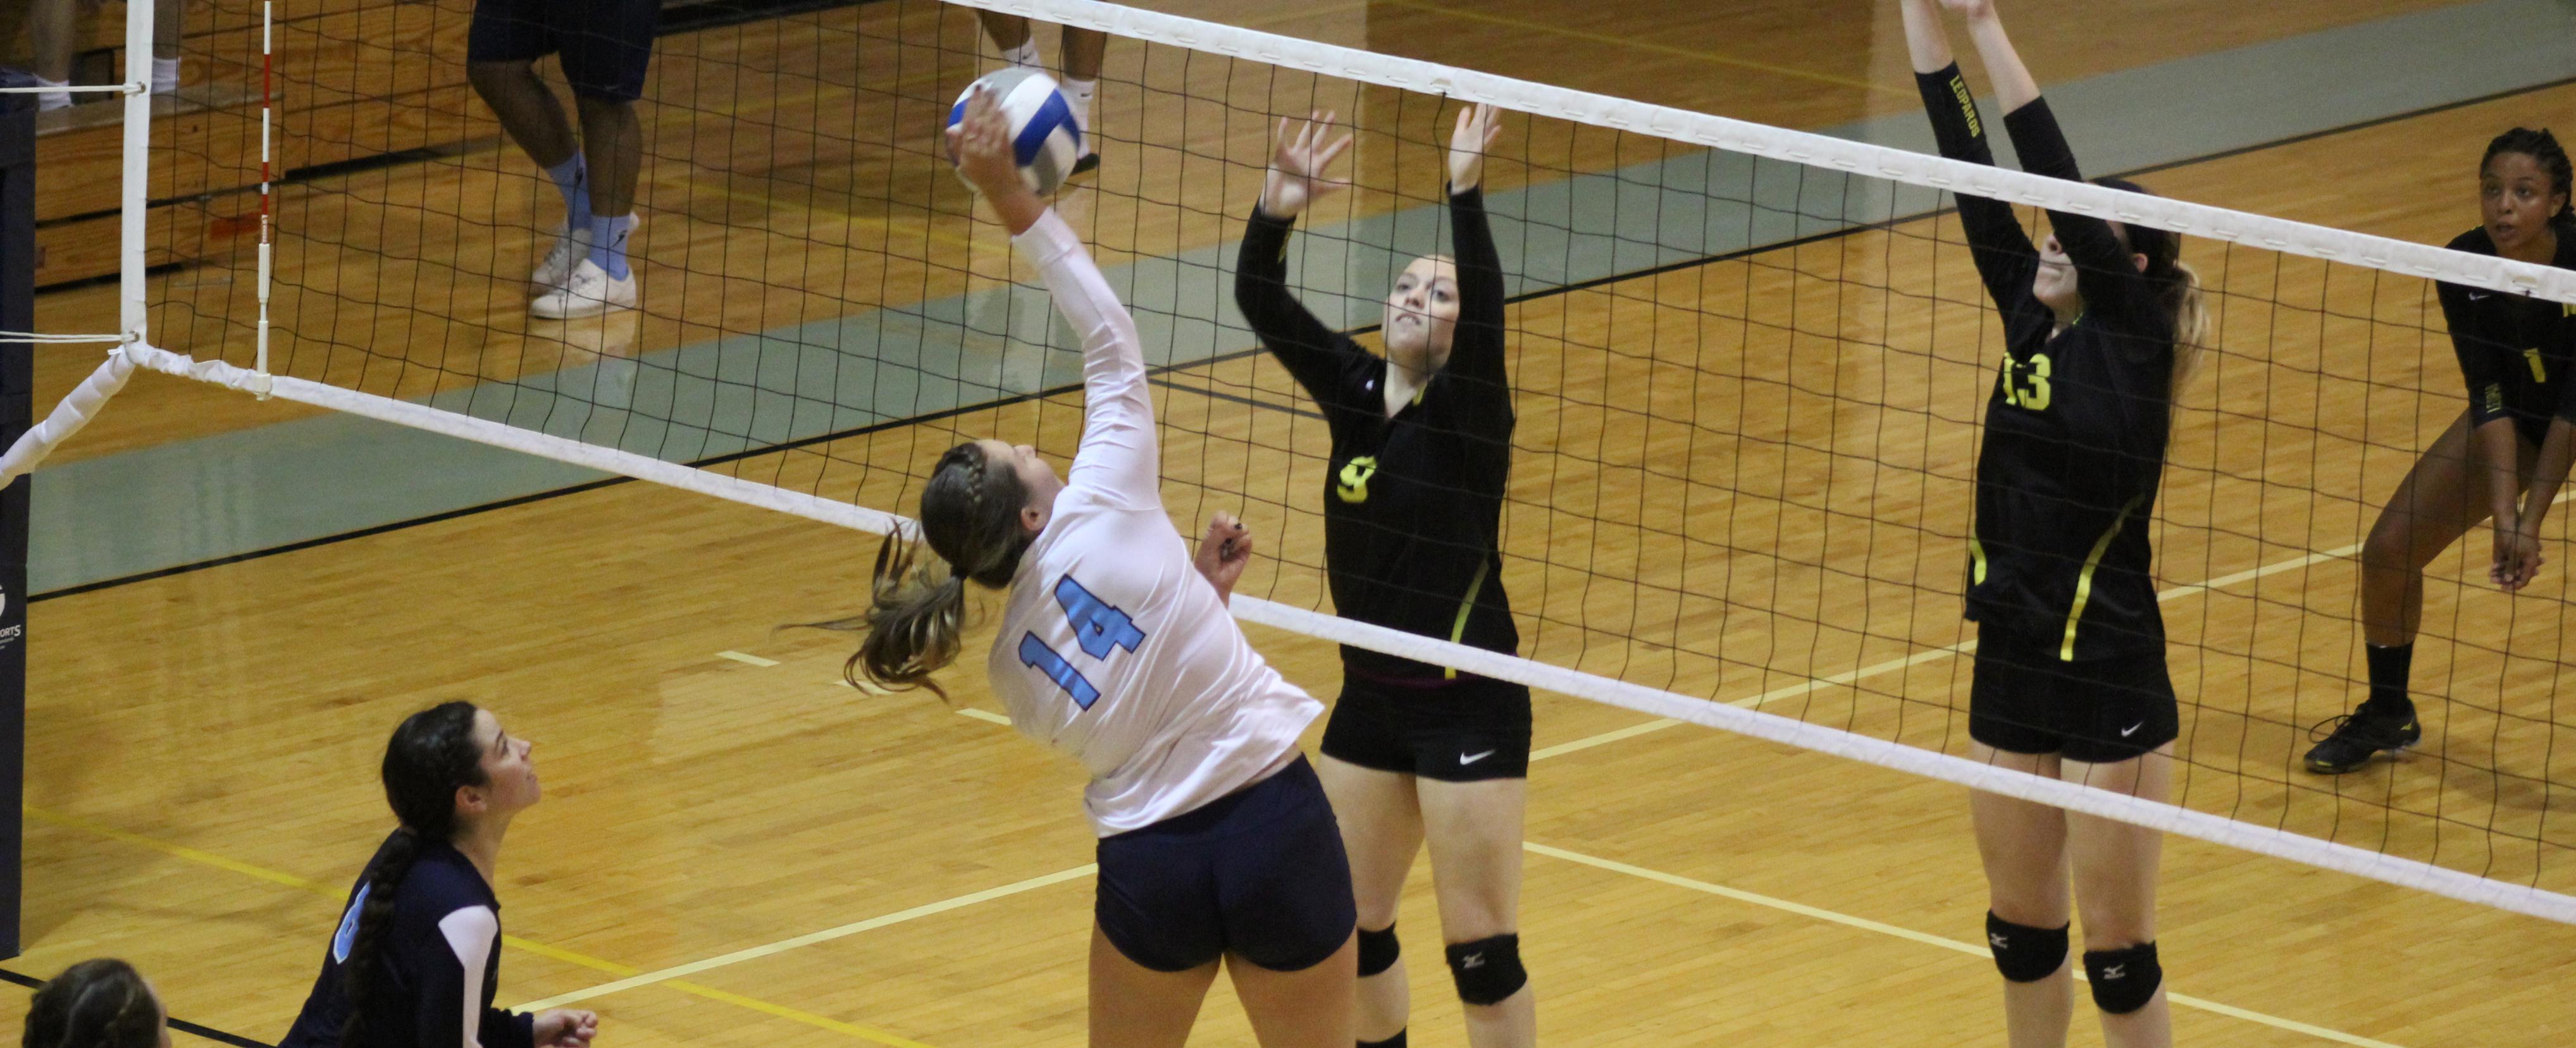 Women's Volleyball Falls to Wentworth in Straight Sets